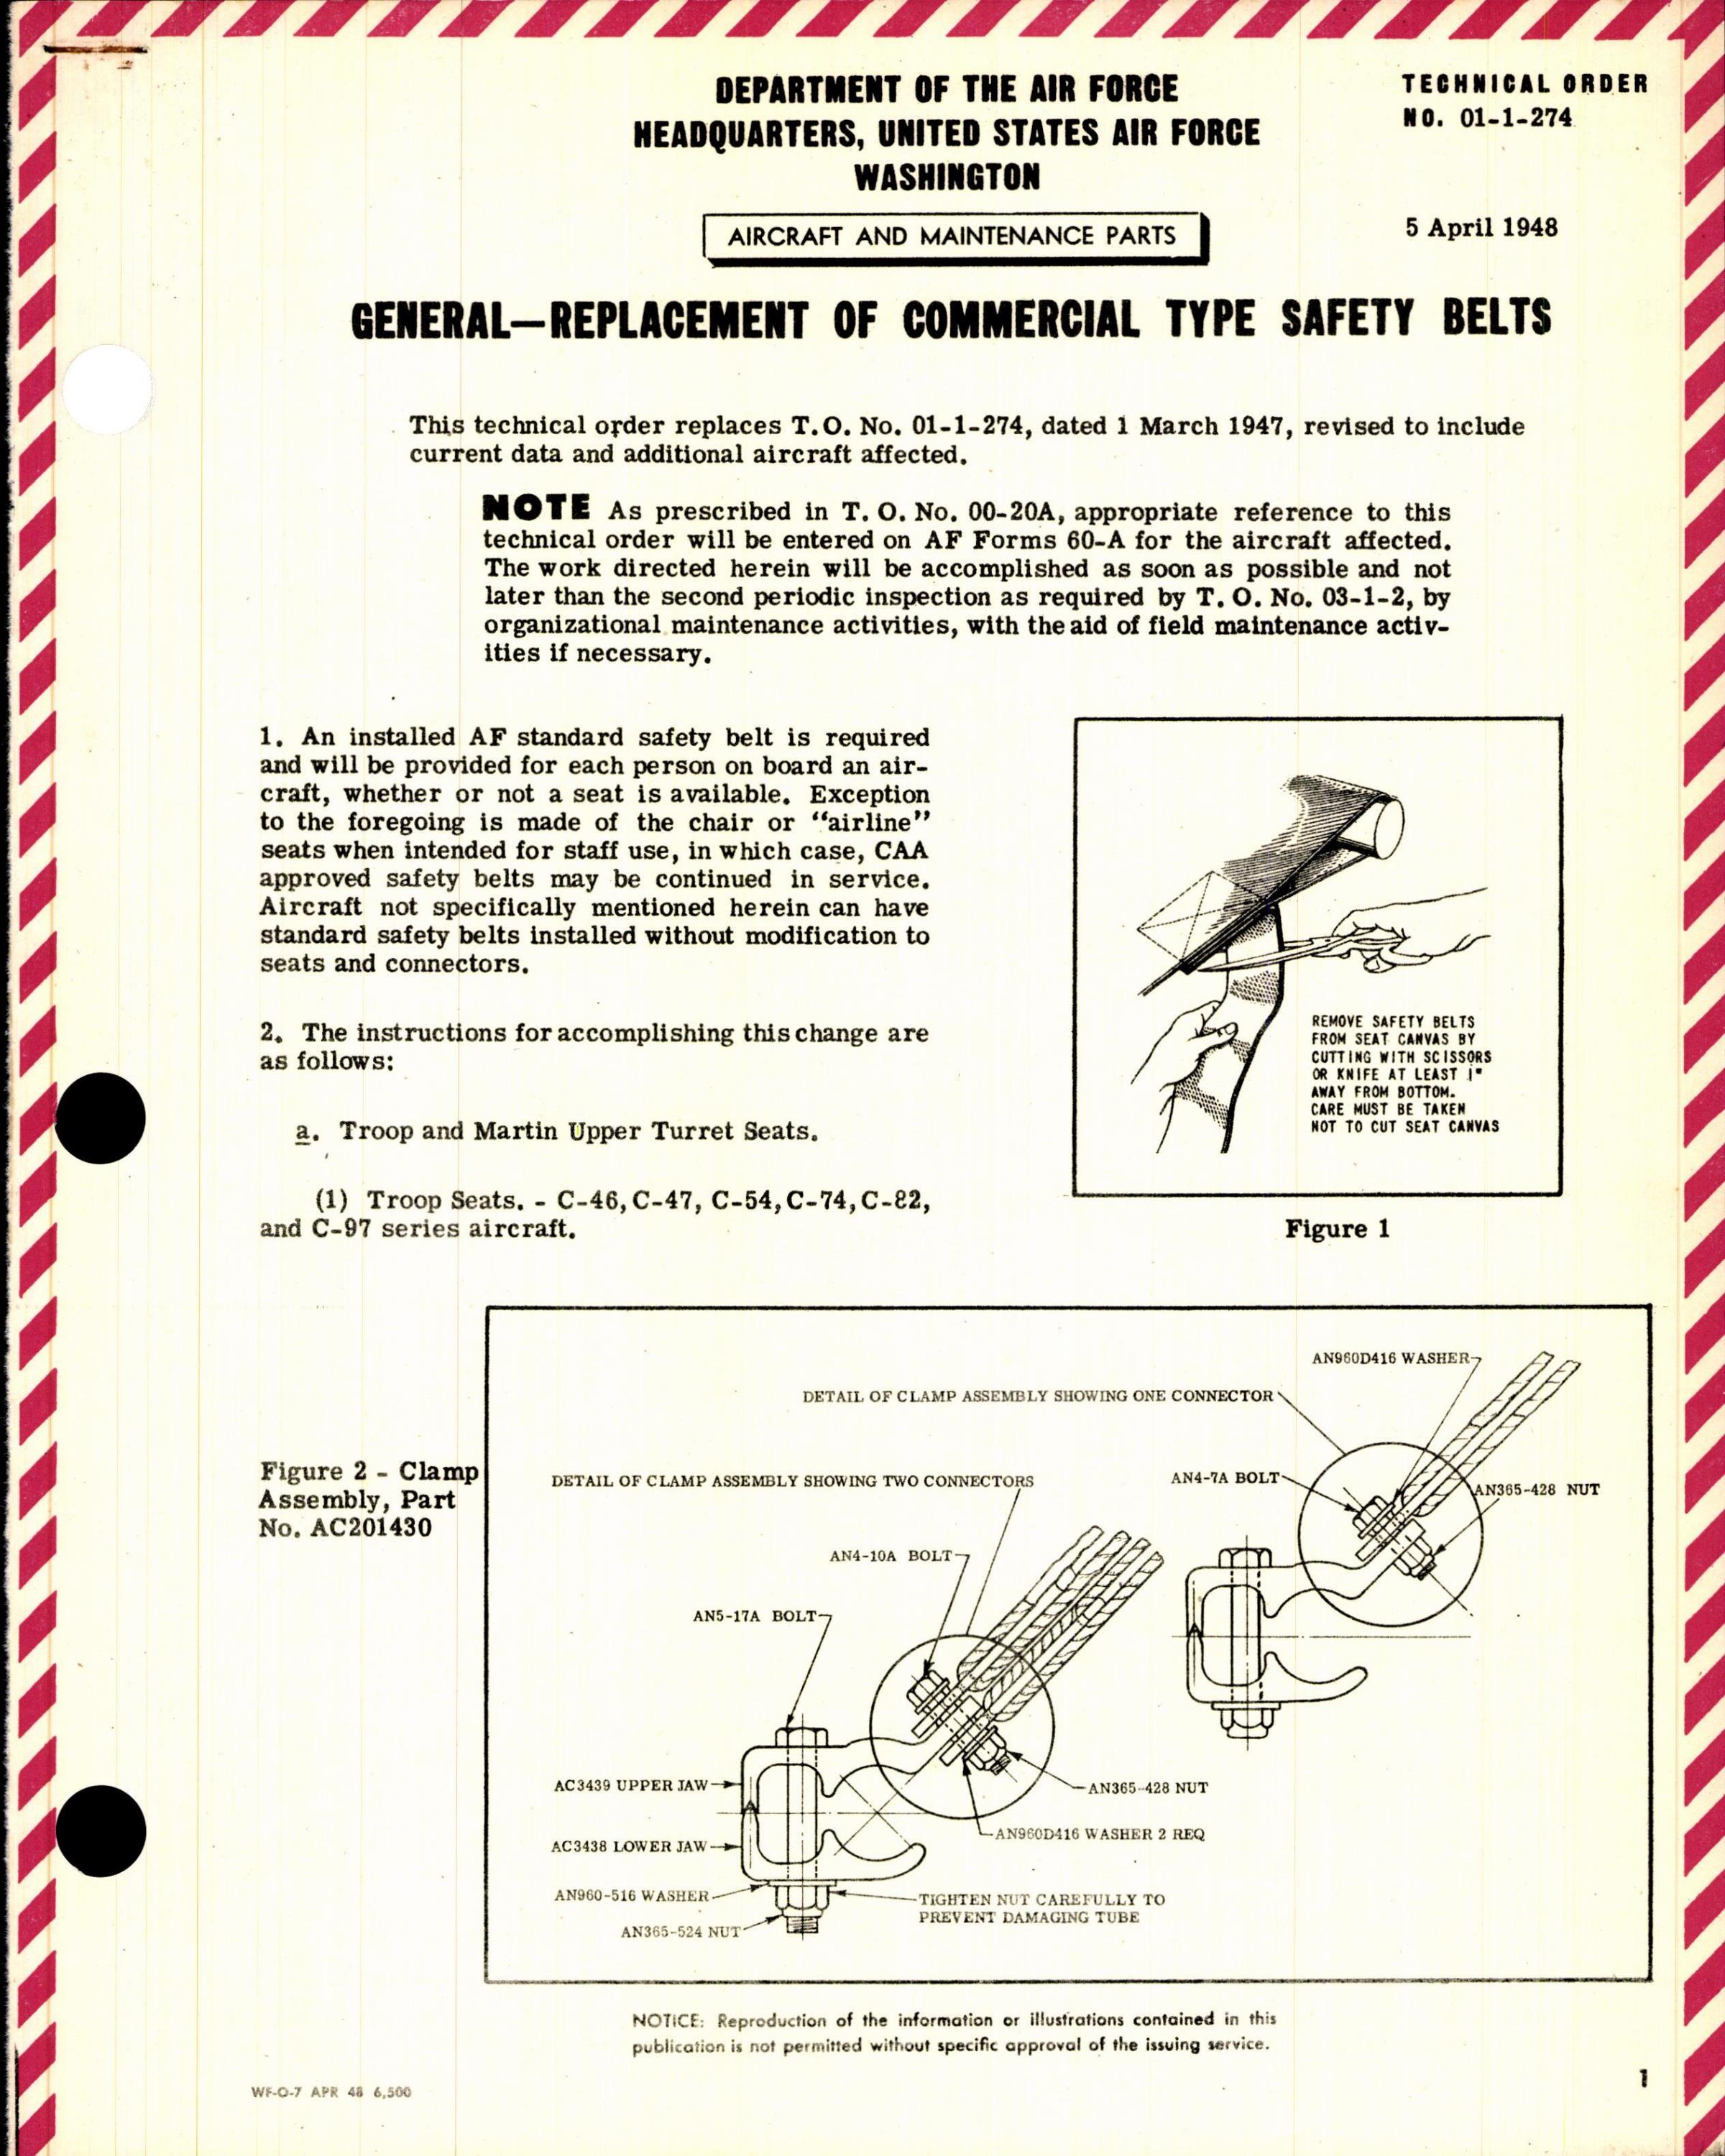 Sample page 1 from AirCorps Library document: Replacement of Commercial Type Safety Belts